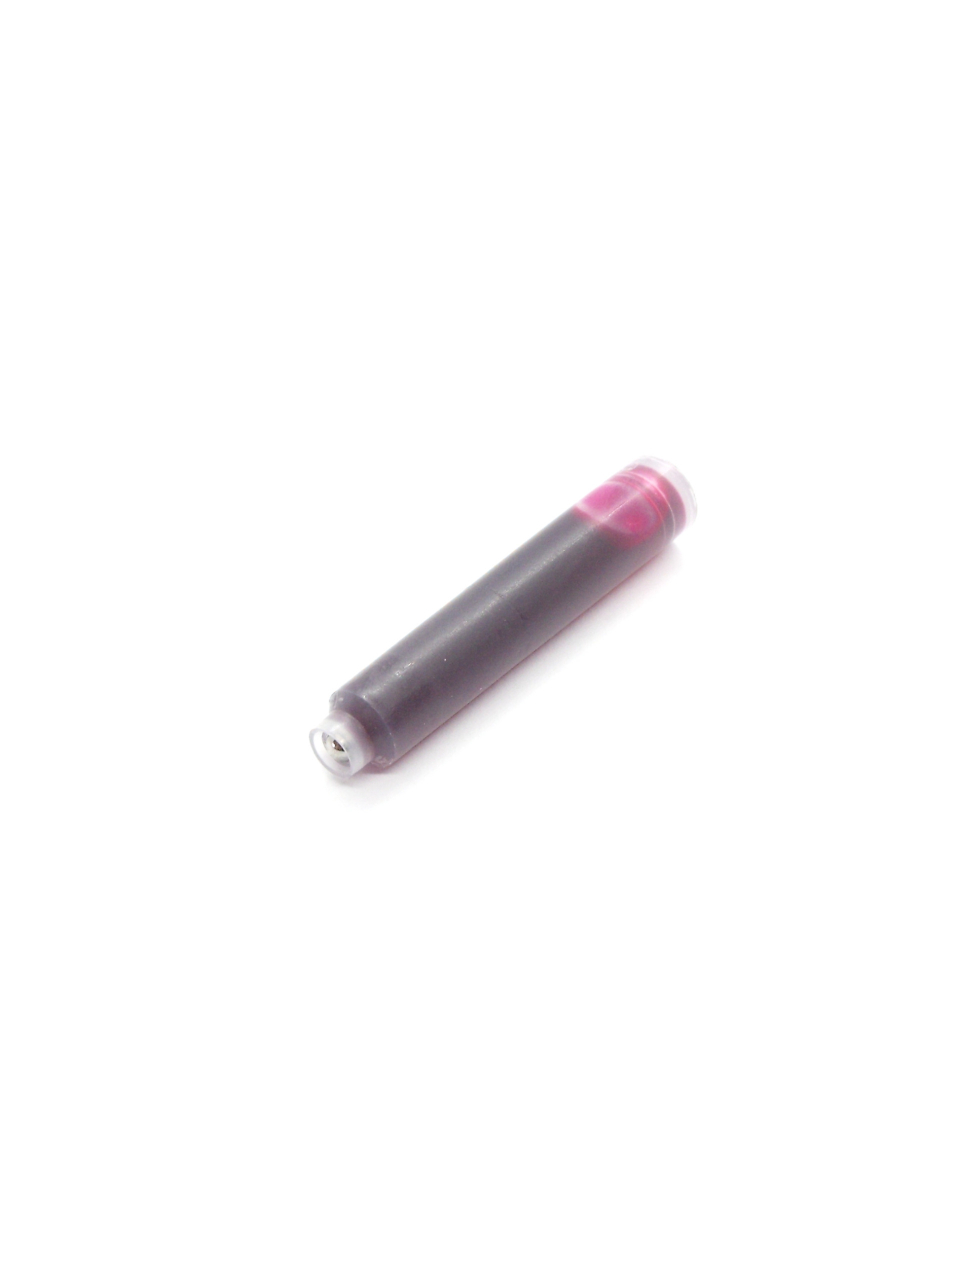 Cartridges For Cleo Skribent Fountain Pens (Pink)